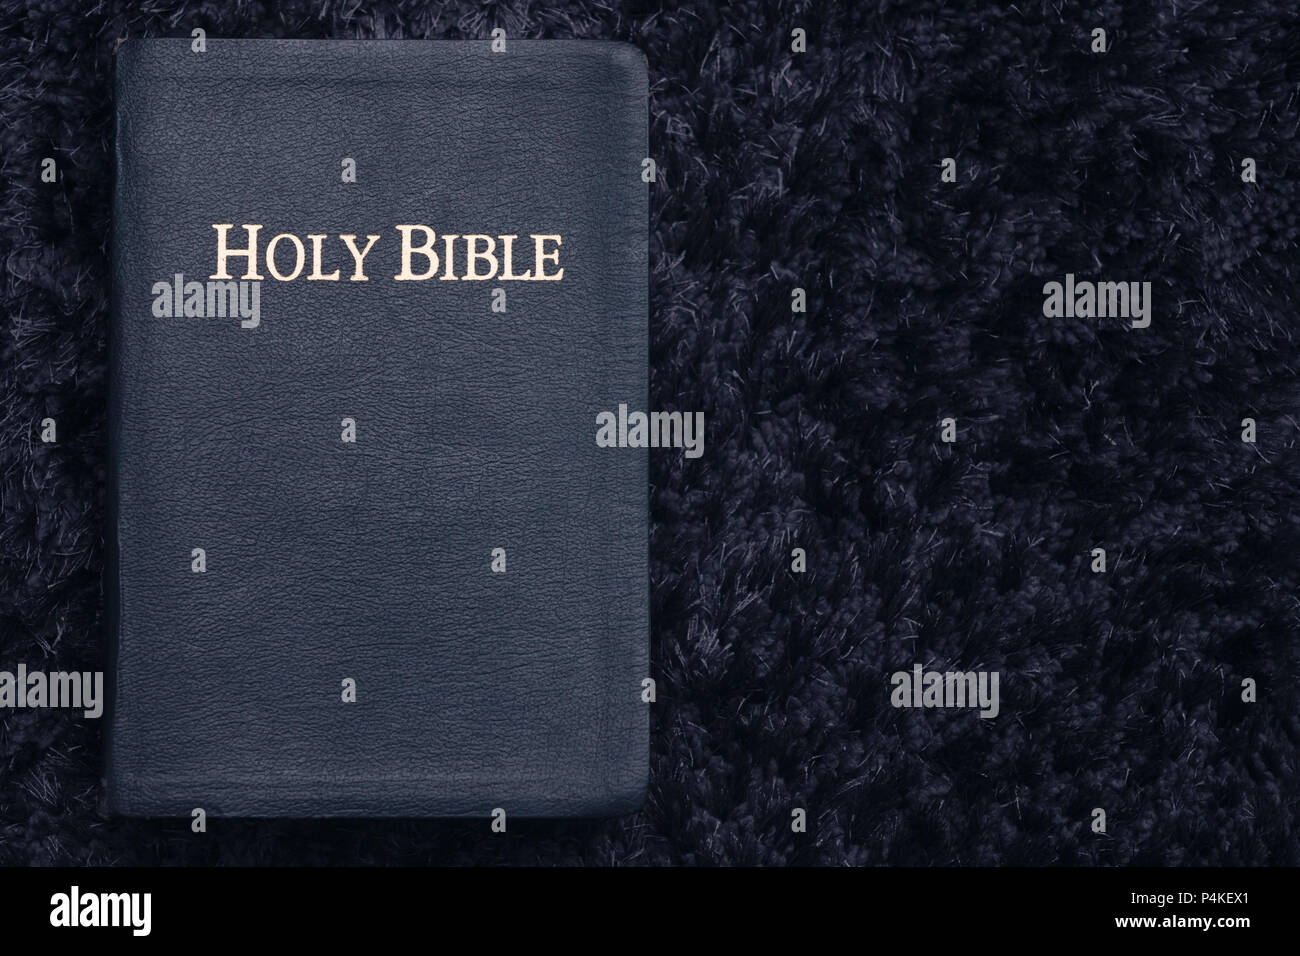 Top View of Holy Bible On Dark Texture Stock Photo